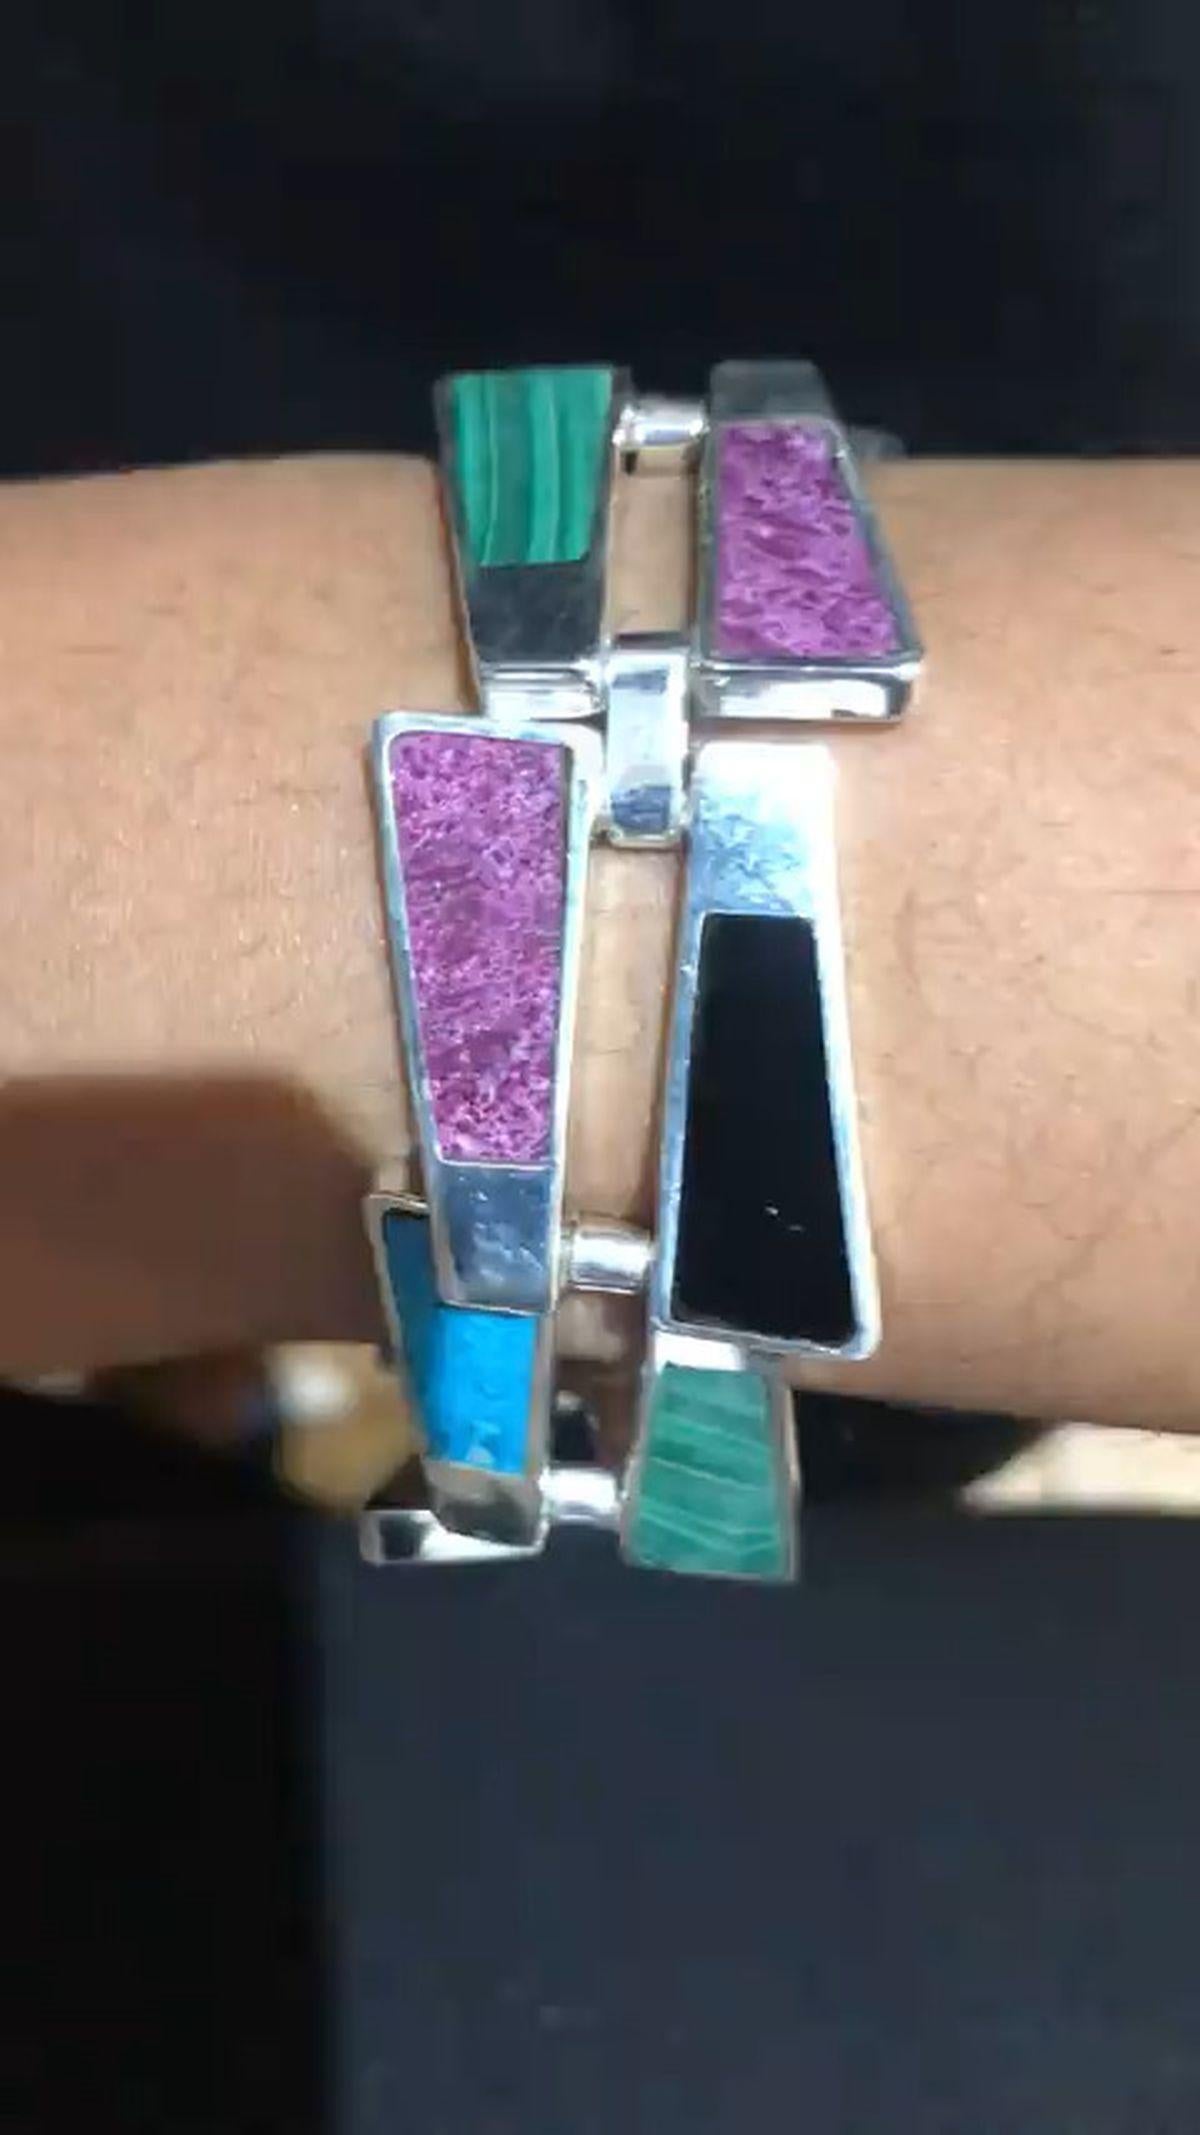 Simply Beautiful! Vintage Native American Navajo Hand Crafted Sterling Silver Multi Gem Link Bracelet. Hand set in Sterling surround with Onyx, Amethyst, Turquoise, Malachite and Lapis Lazuli Stylized Arrows. Measuring approx. 7.25” L x 0.75” W.